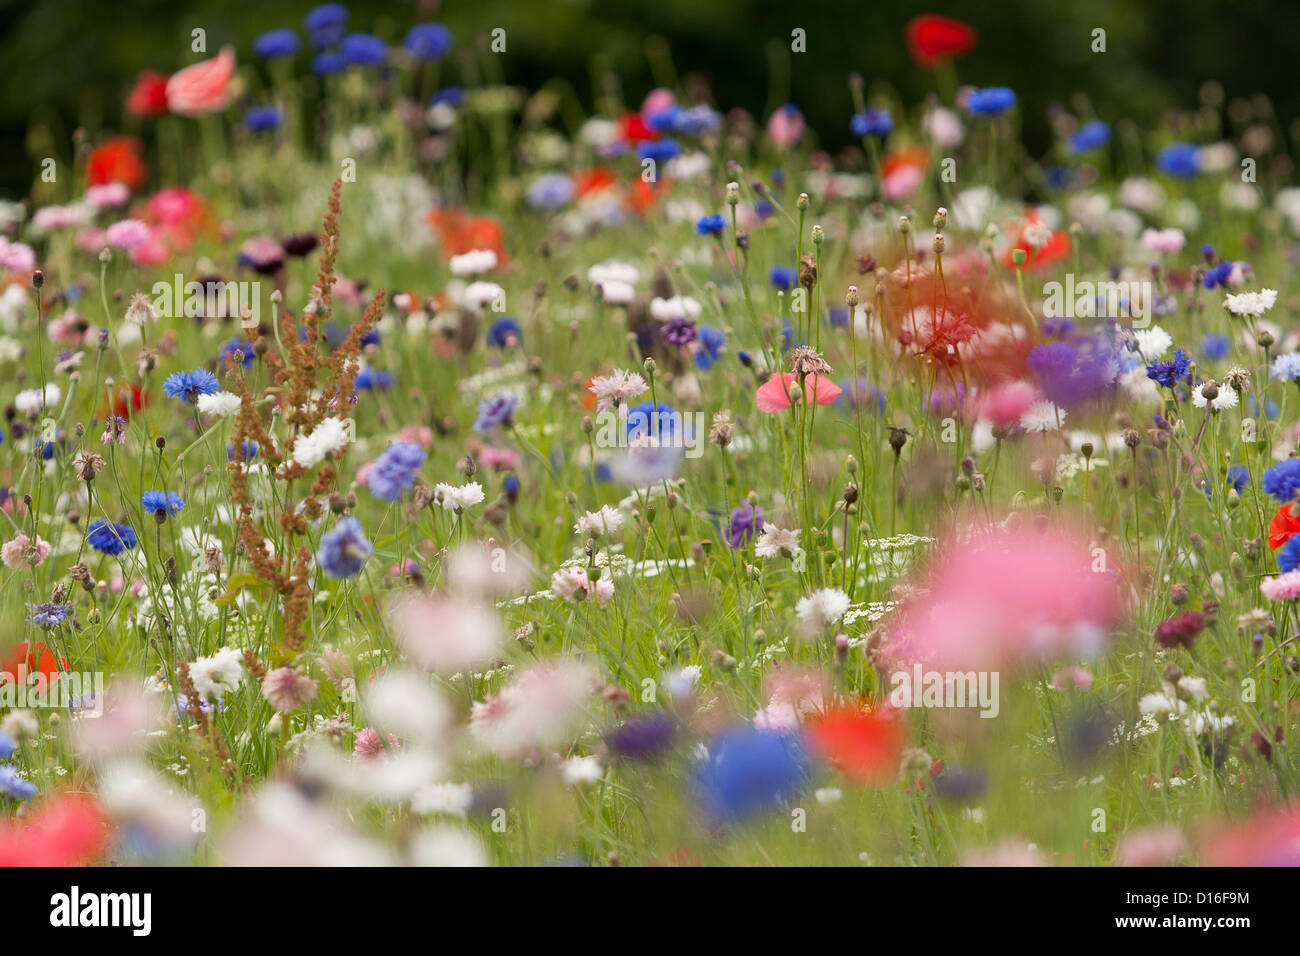 A field of wild flowers Stock Photo